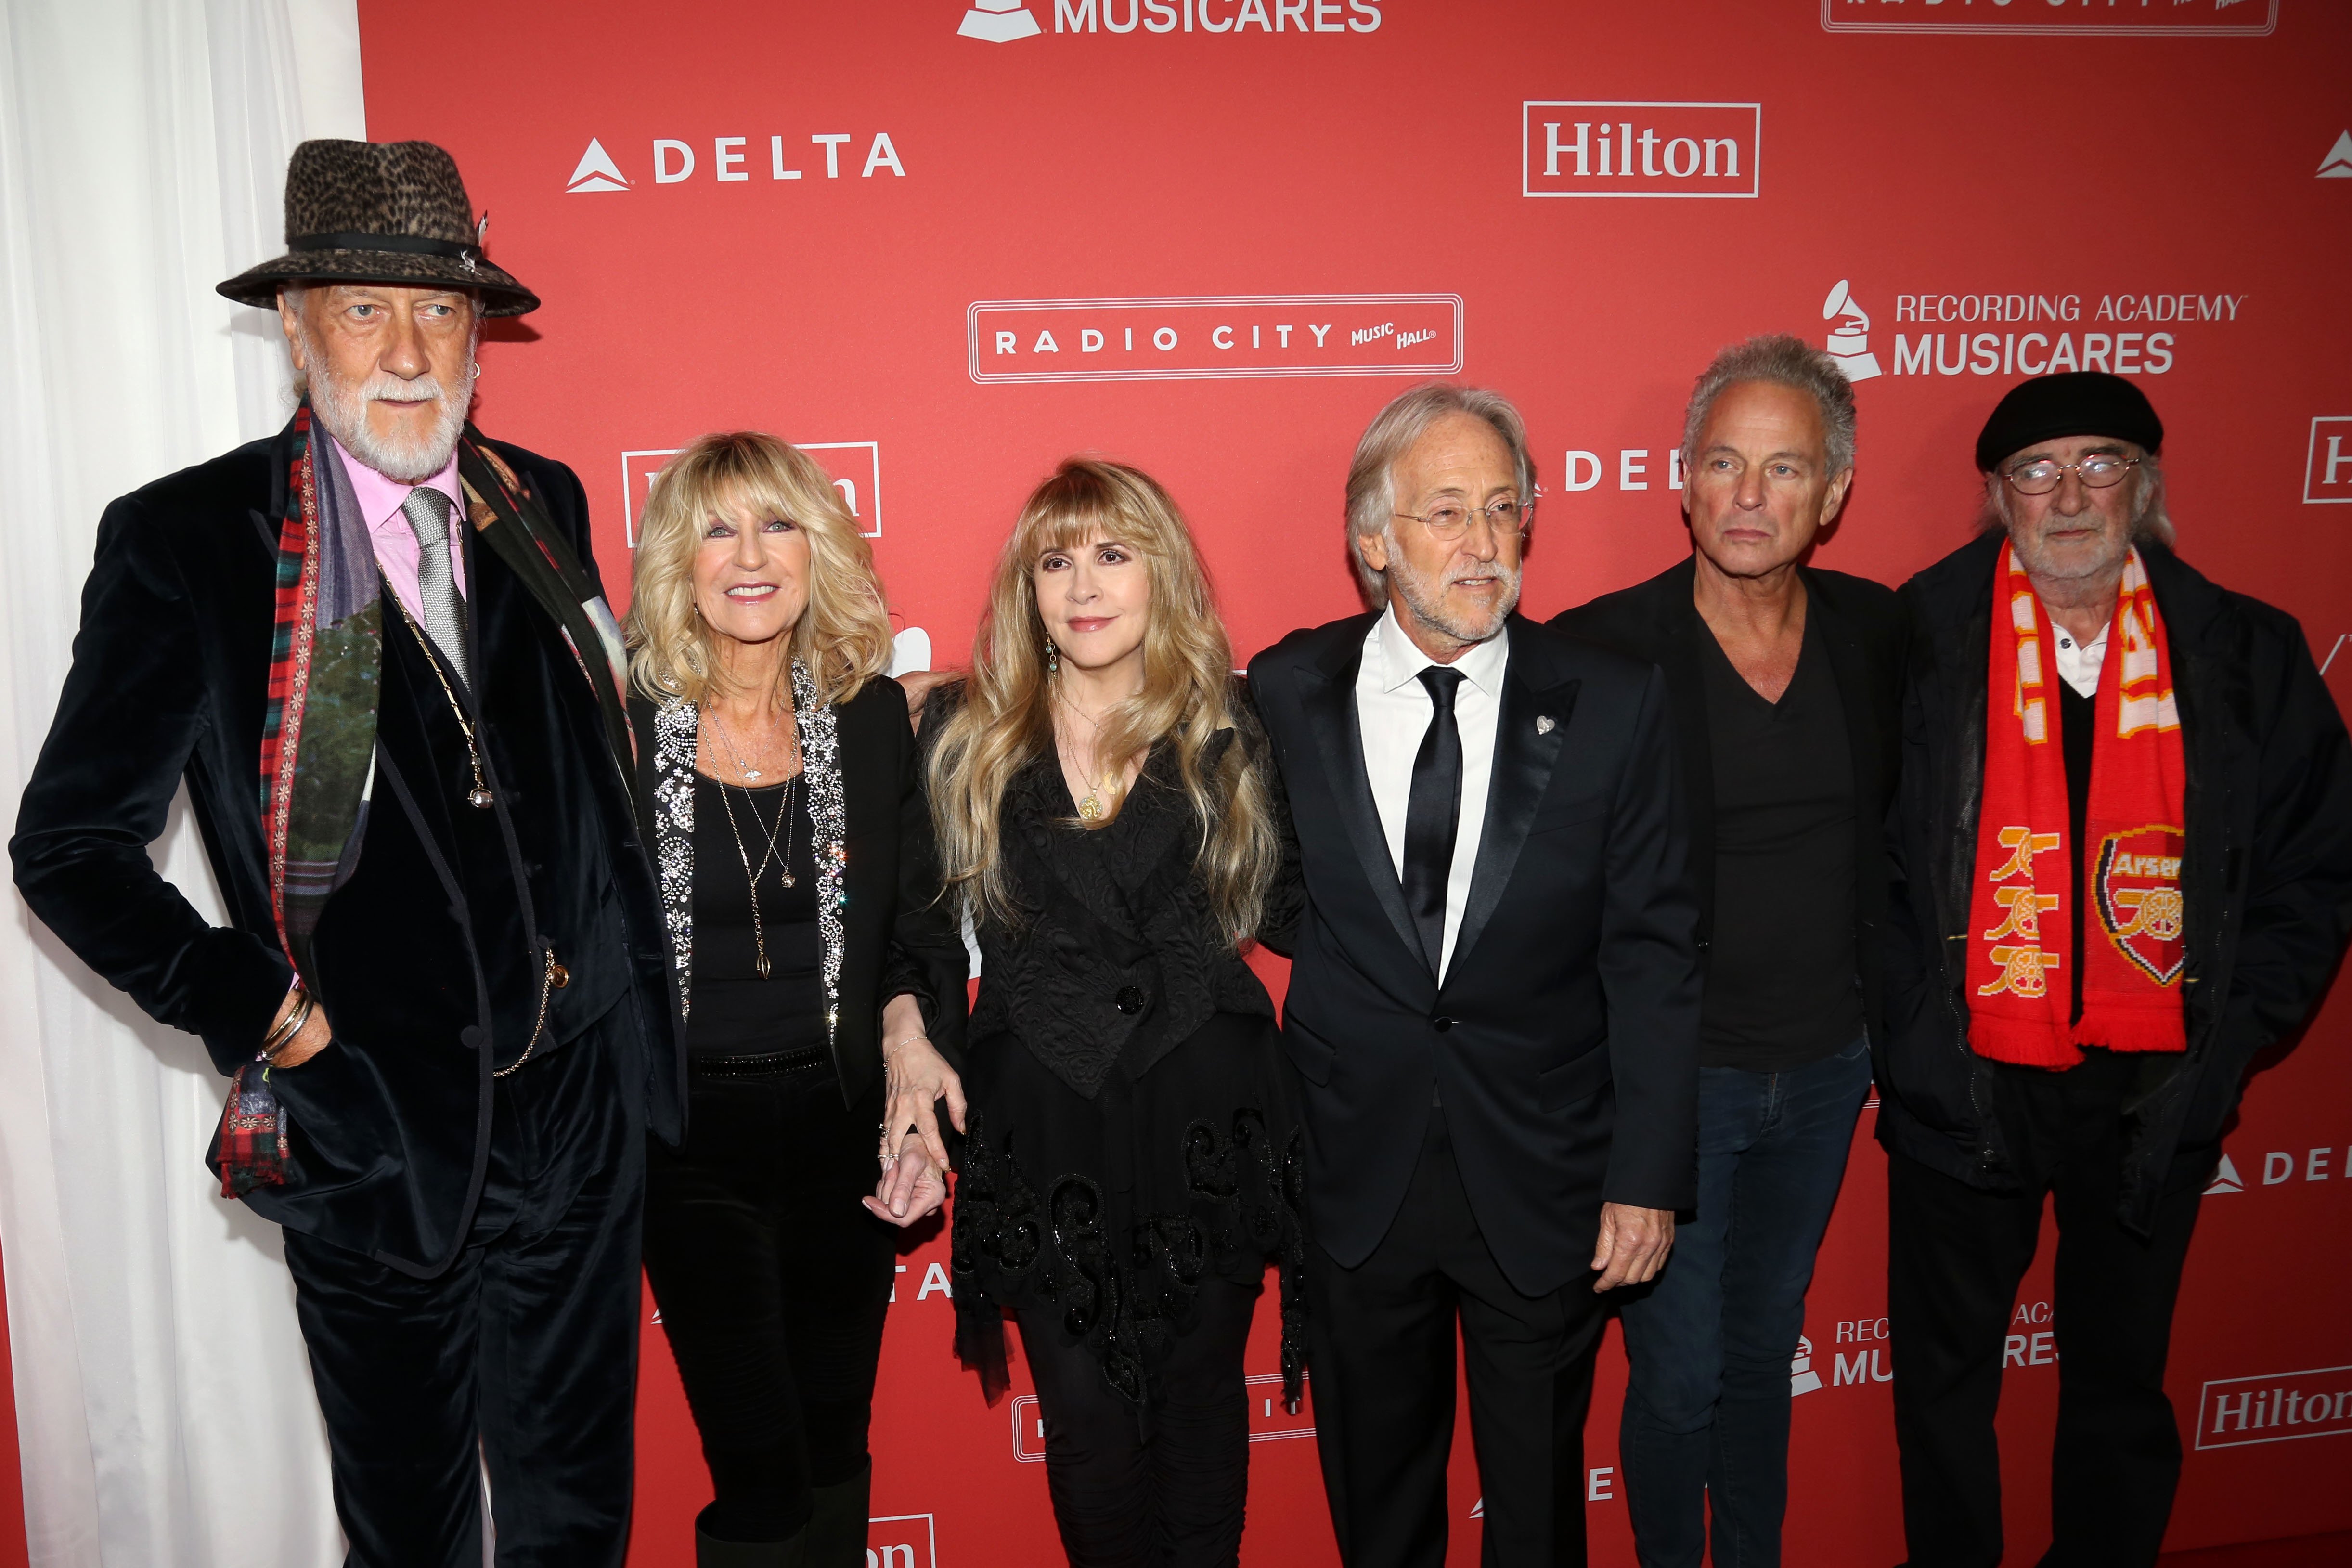 Mick Fleetwood, Christine McVie, Stevie Nicks, Recording Academy President and CEO Neil Portnow, Lindsey Buckingham, and John McVie of Fleetwood Mac at the 2018 MusiCares Person of the Year event on January 26, 2018 | Source: Getty Images